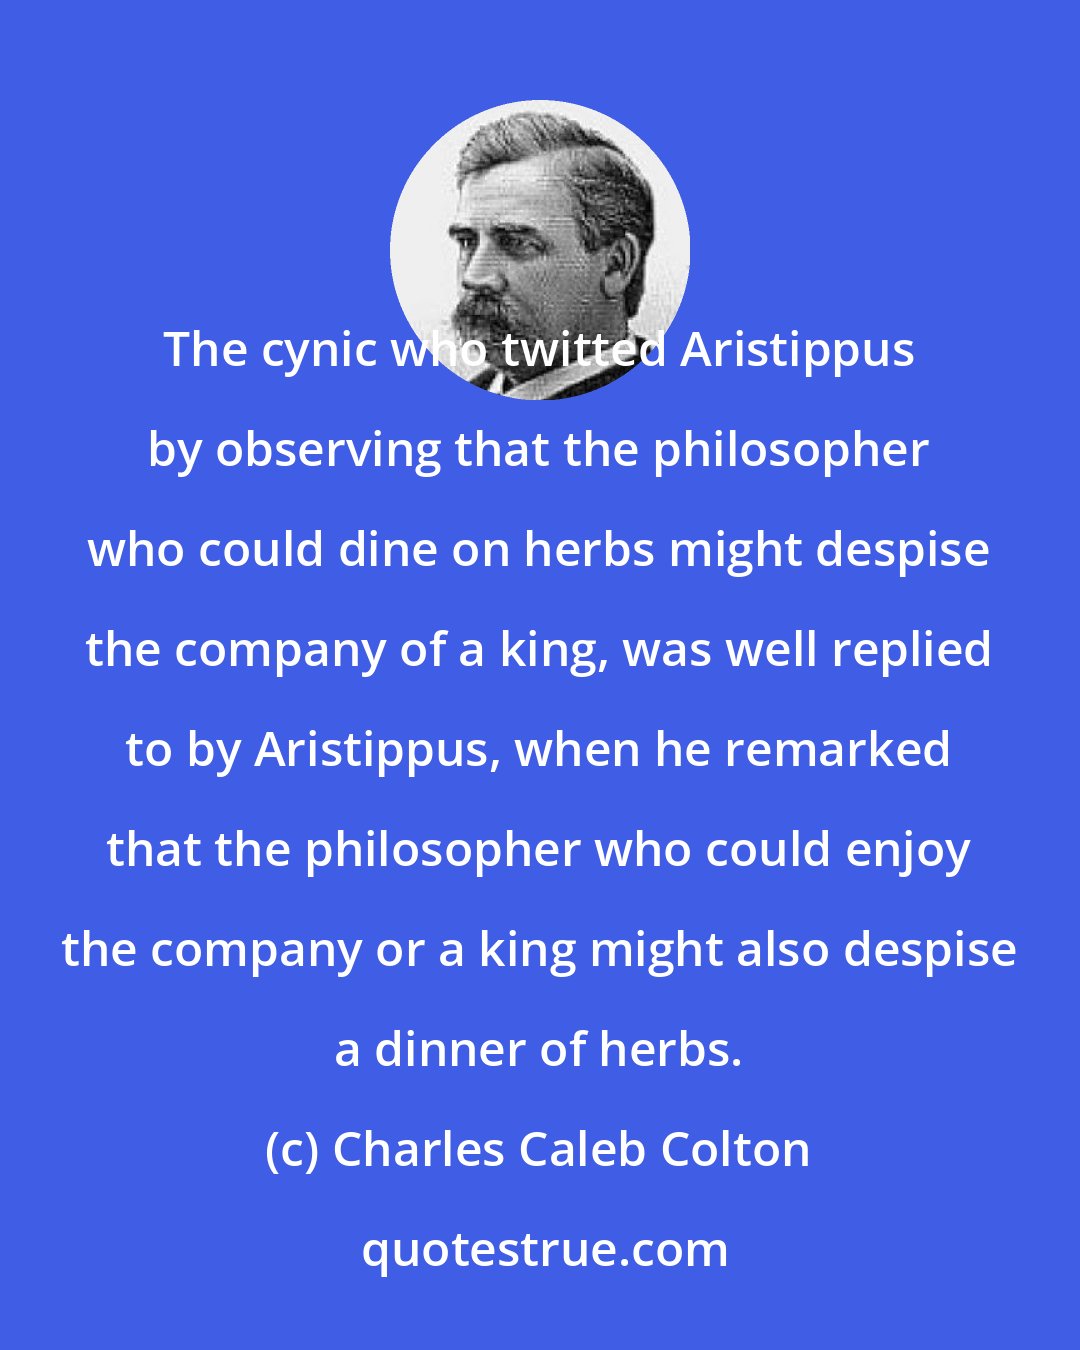 Charles Caleb Colton: The cynic who twitted Aristippus by observing that the philosopher who could dine on herbs might despise the company of a king, was well replied to by Aristippus, when he remarked that the philosopher who could enjoy the company or a king might also despise a dinner of herbs.